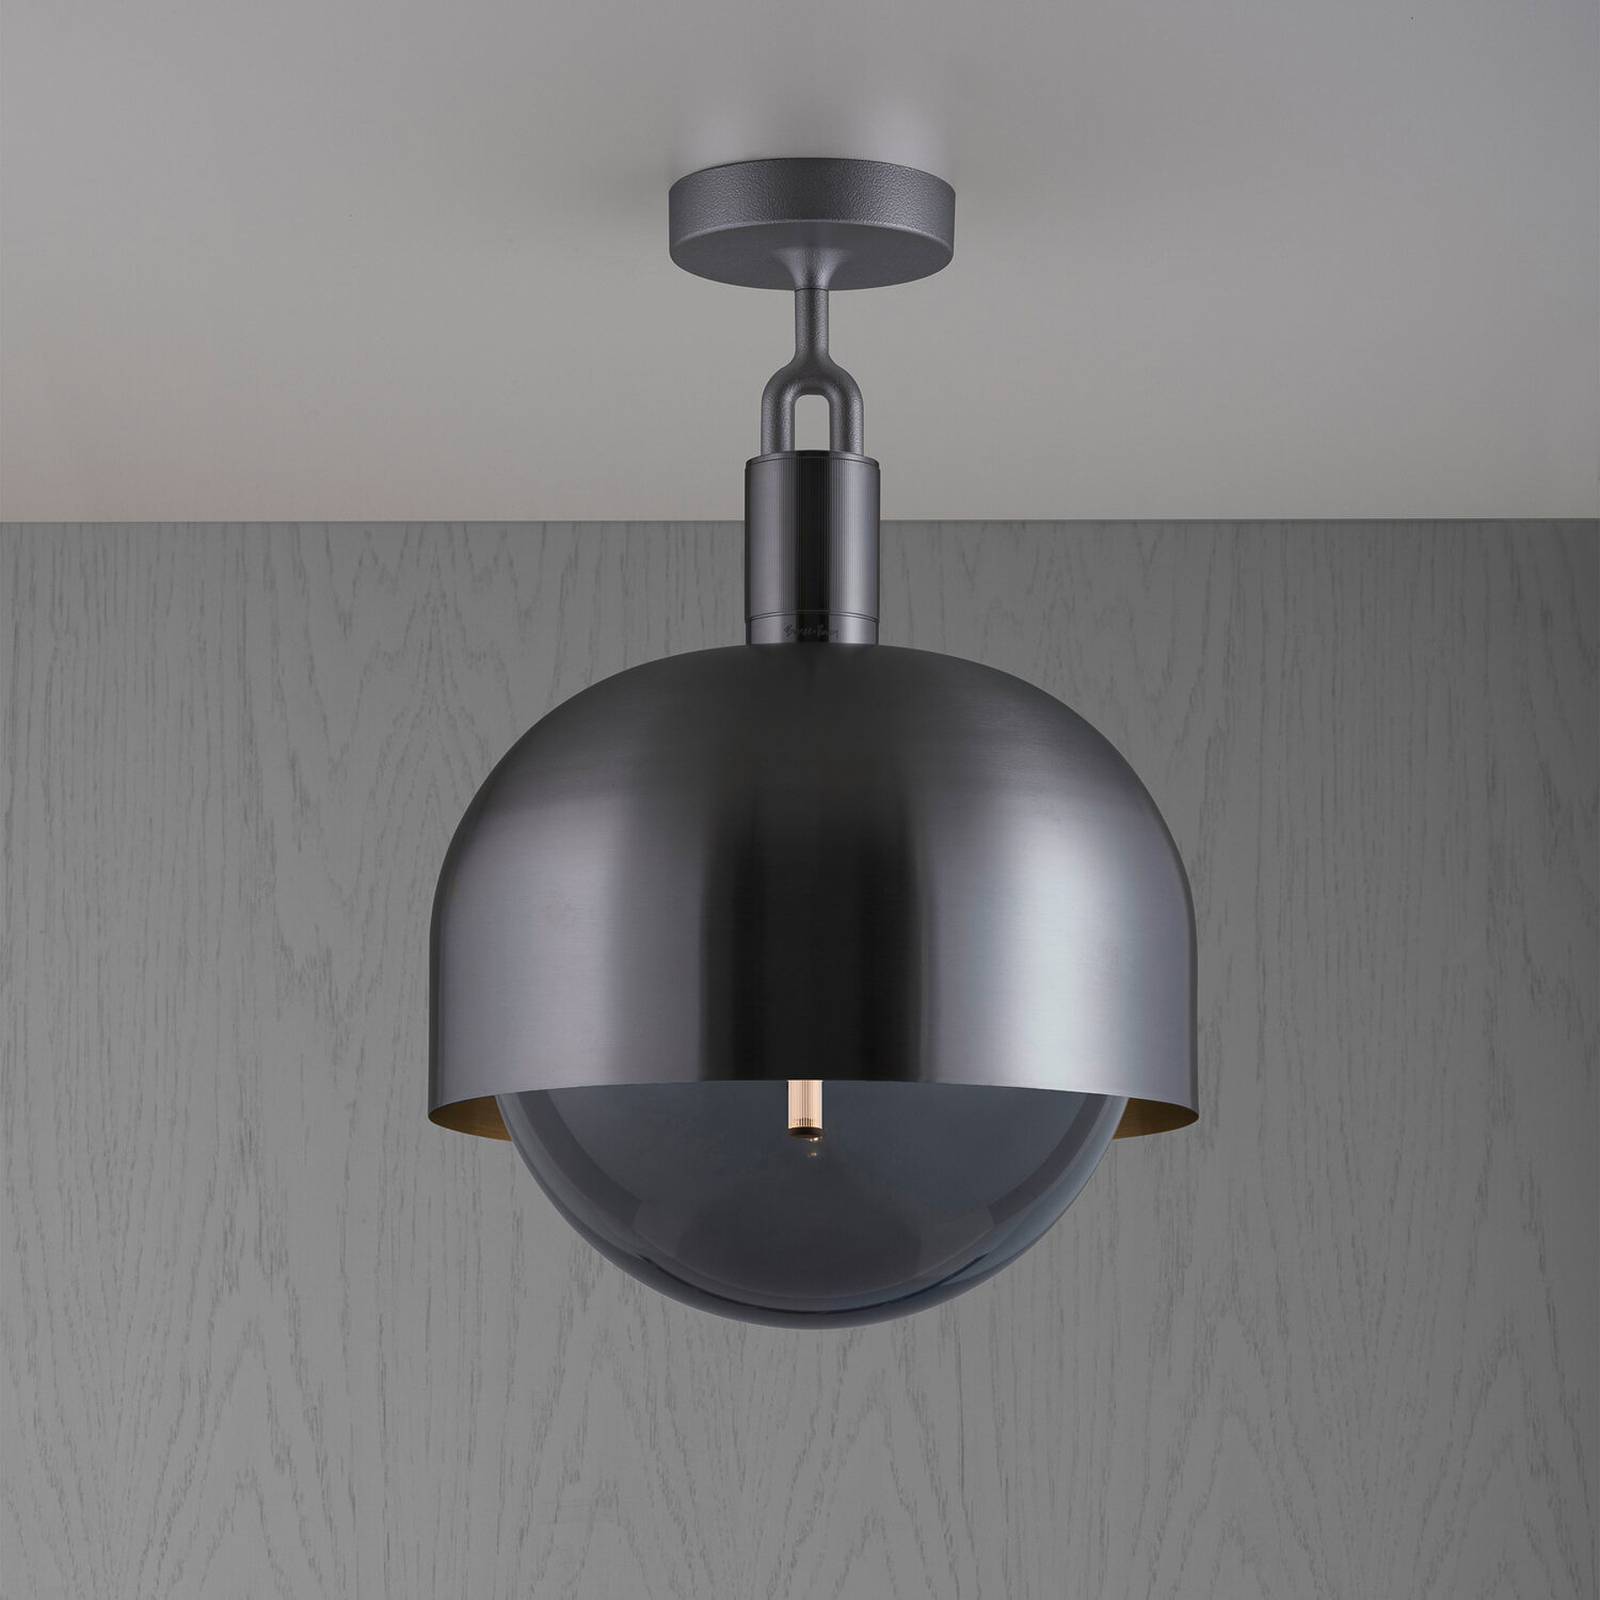 Image of Buster + Punch Forked plafond Gunmetal/rauch Ø 34cm 